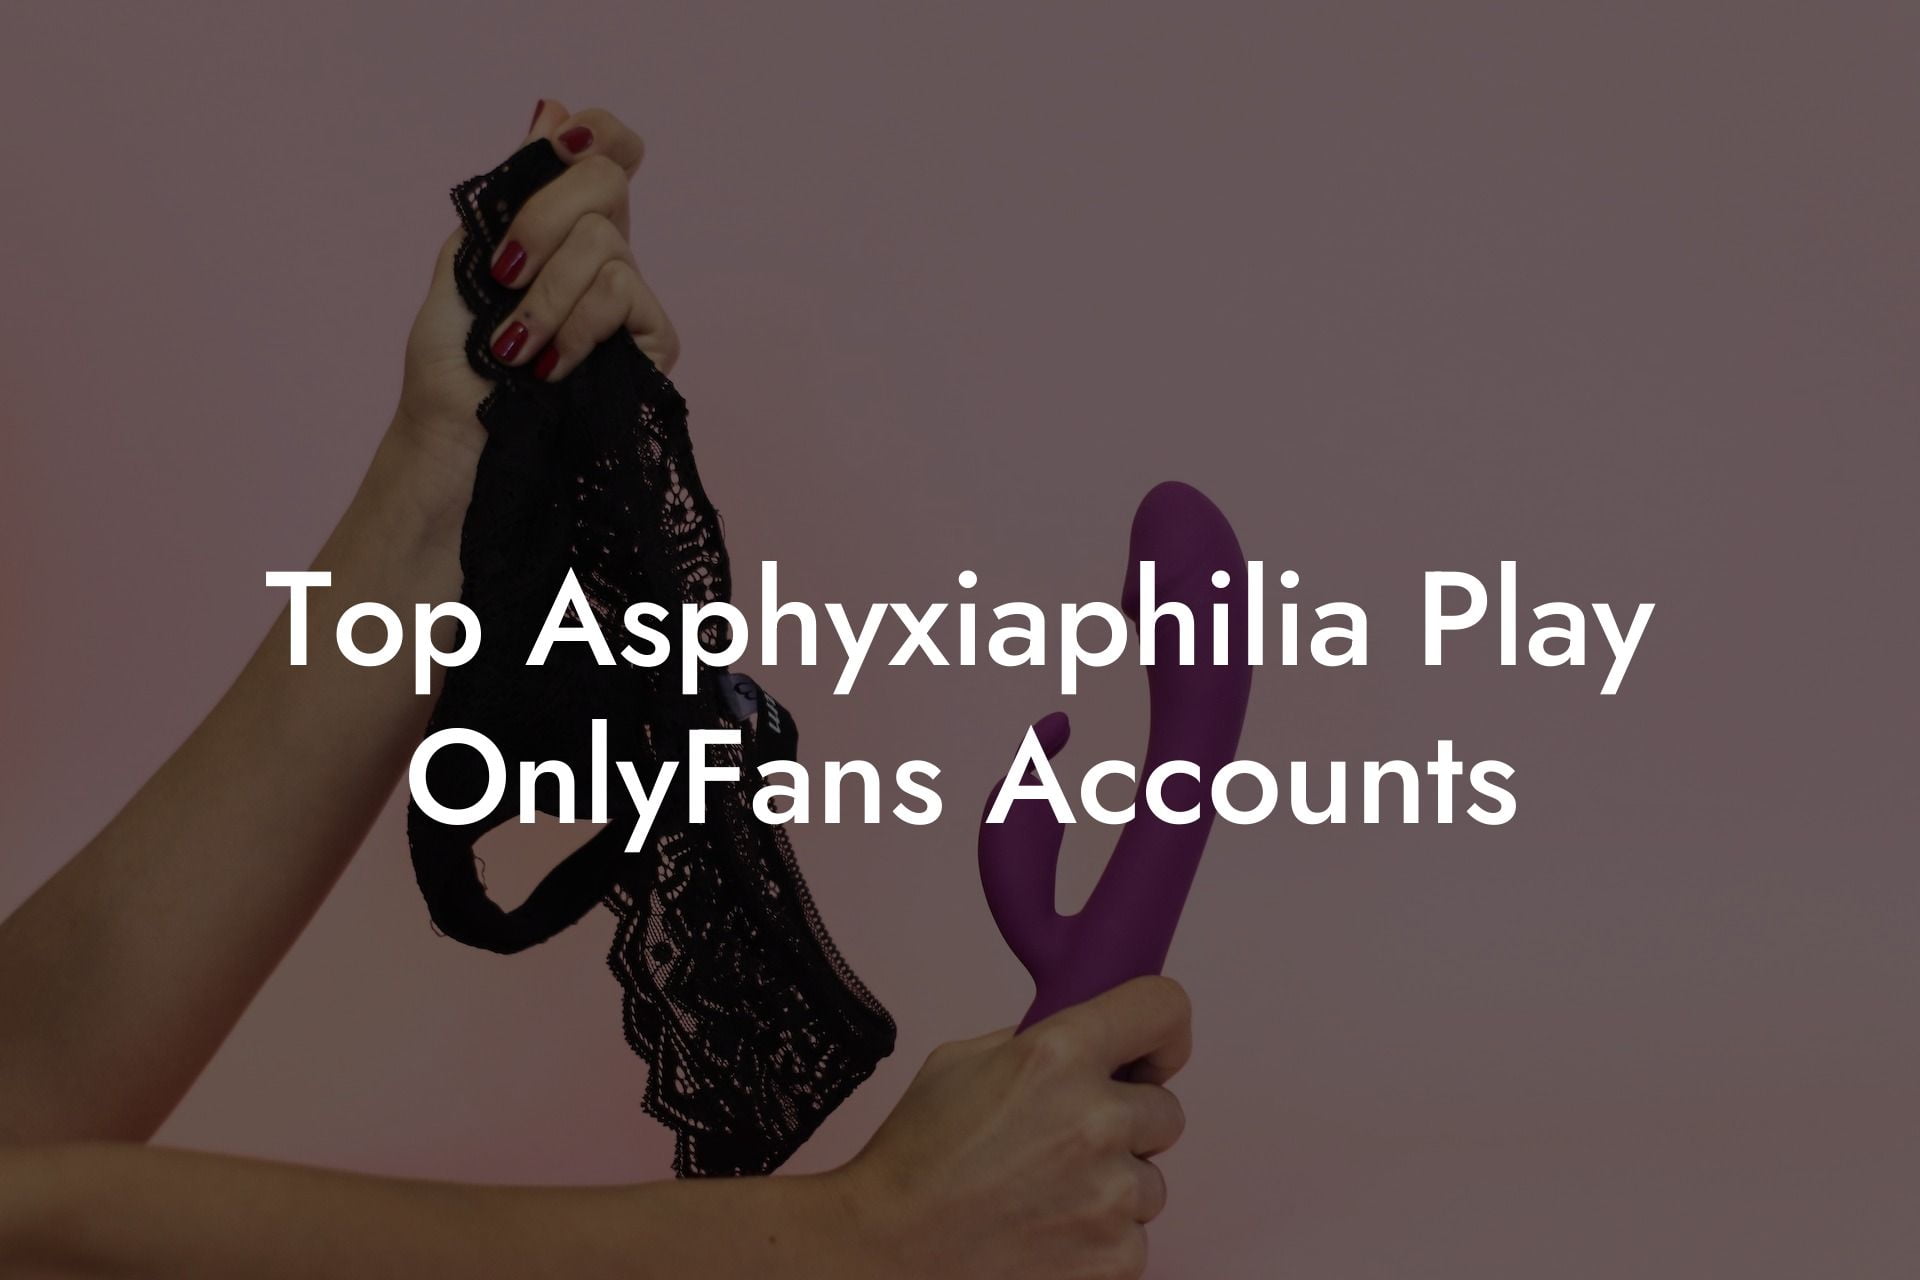 Top Asphyxiaphilia Play OnlyFans Accounts